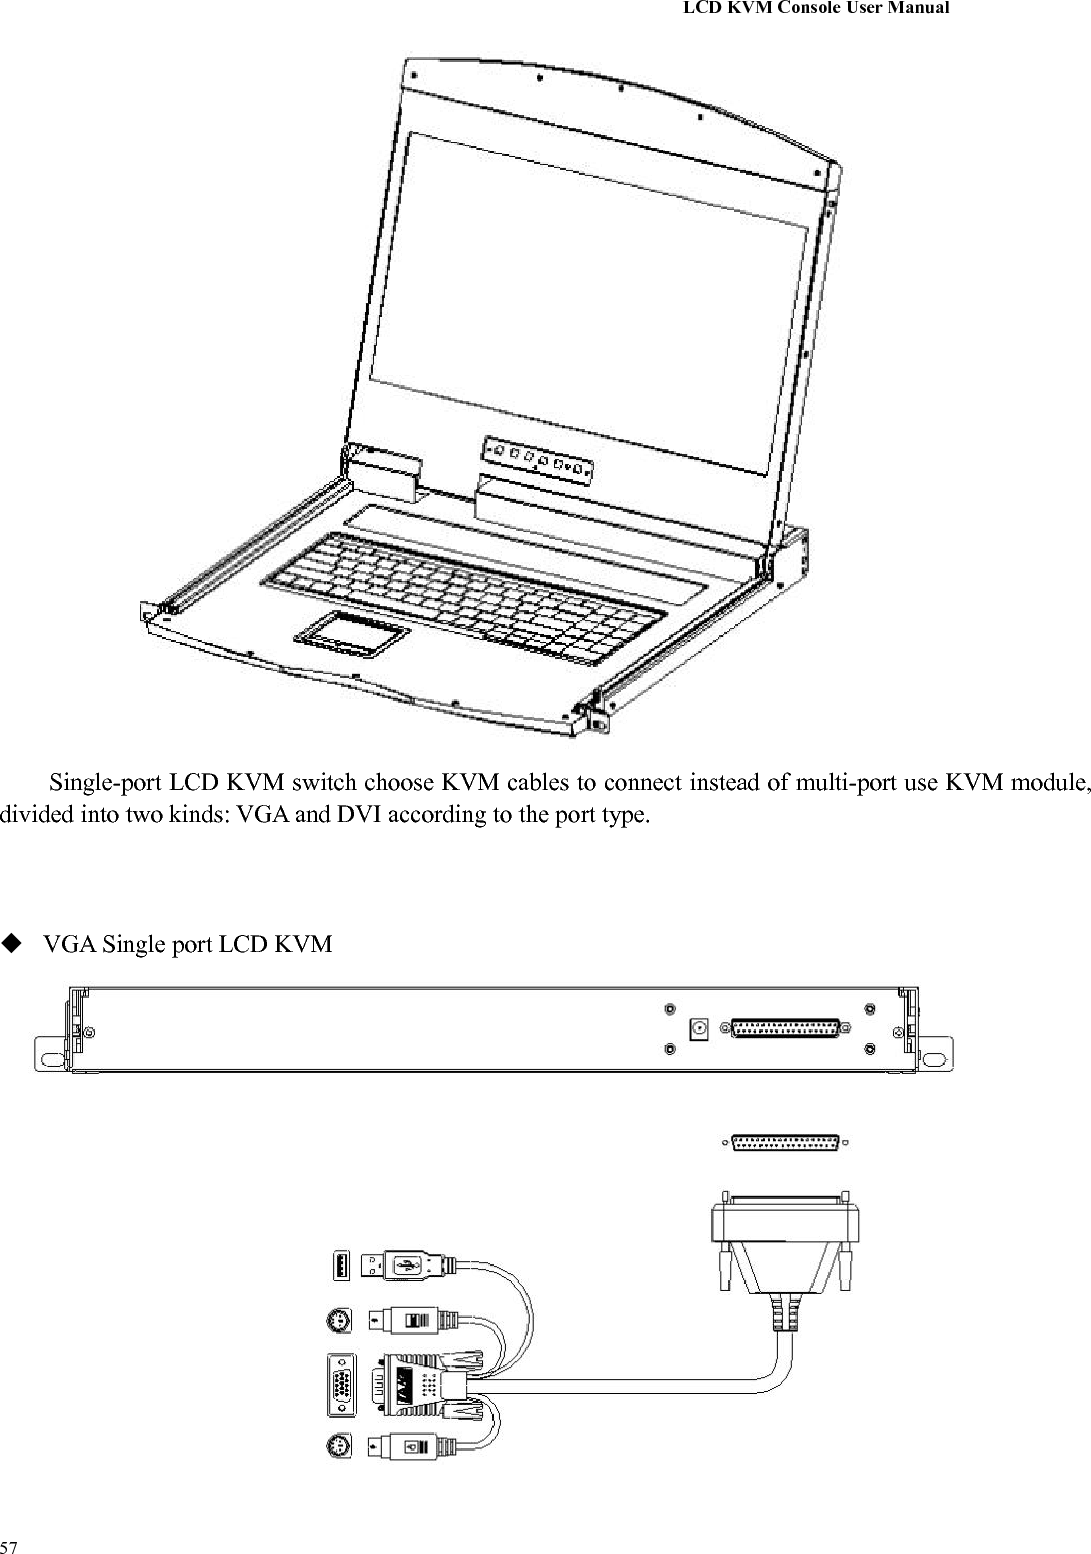 LCD KVM Console User Manual57Single-port LCD KVM switch choose KVM cables to connect instead of multi-port use KVM module,divided into two kinds: VGA and DVI according to the port type.VGA Single port LCD KVM